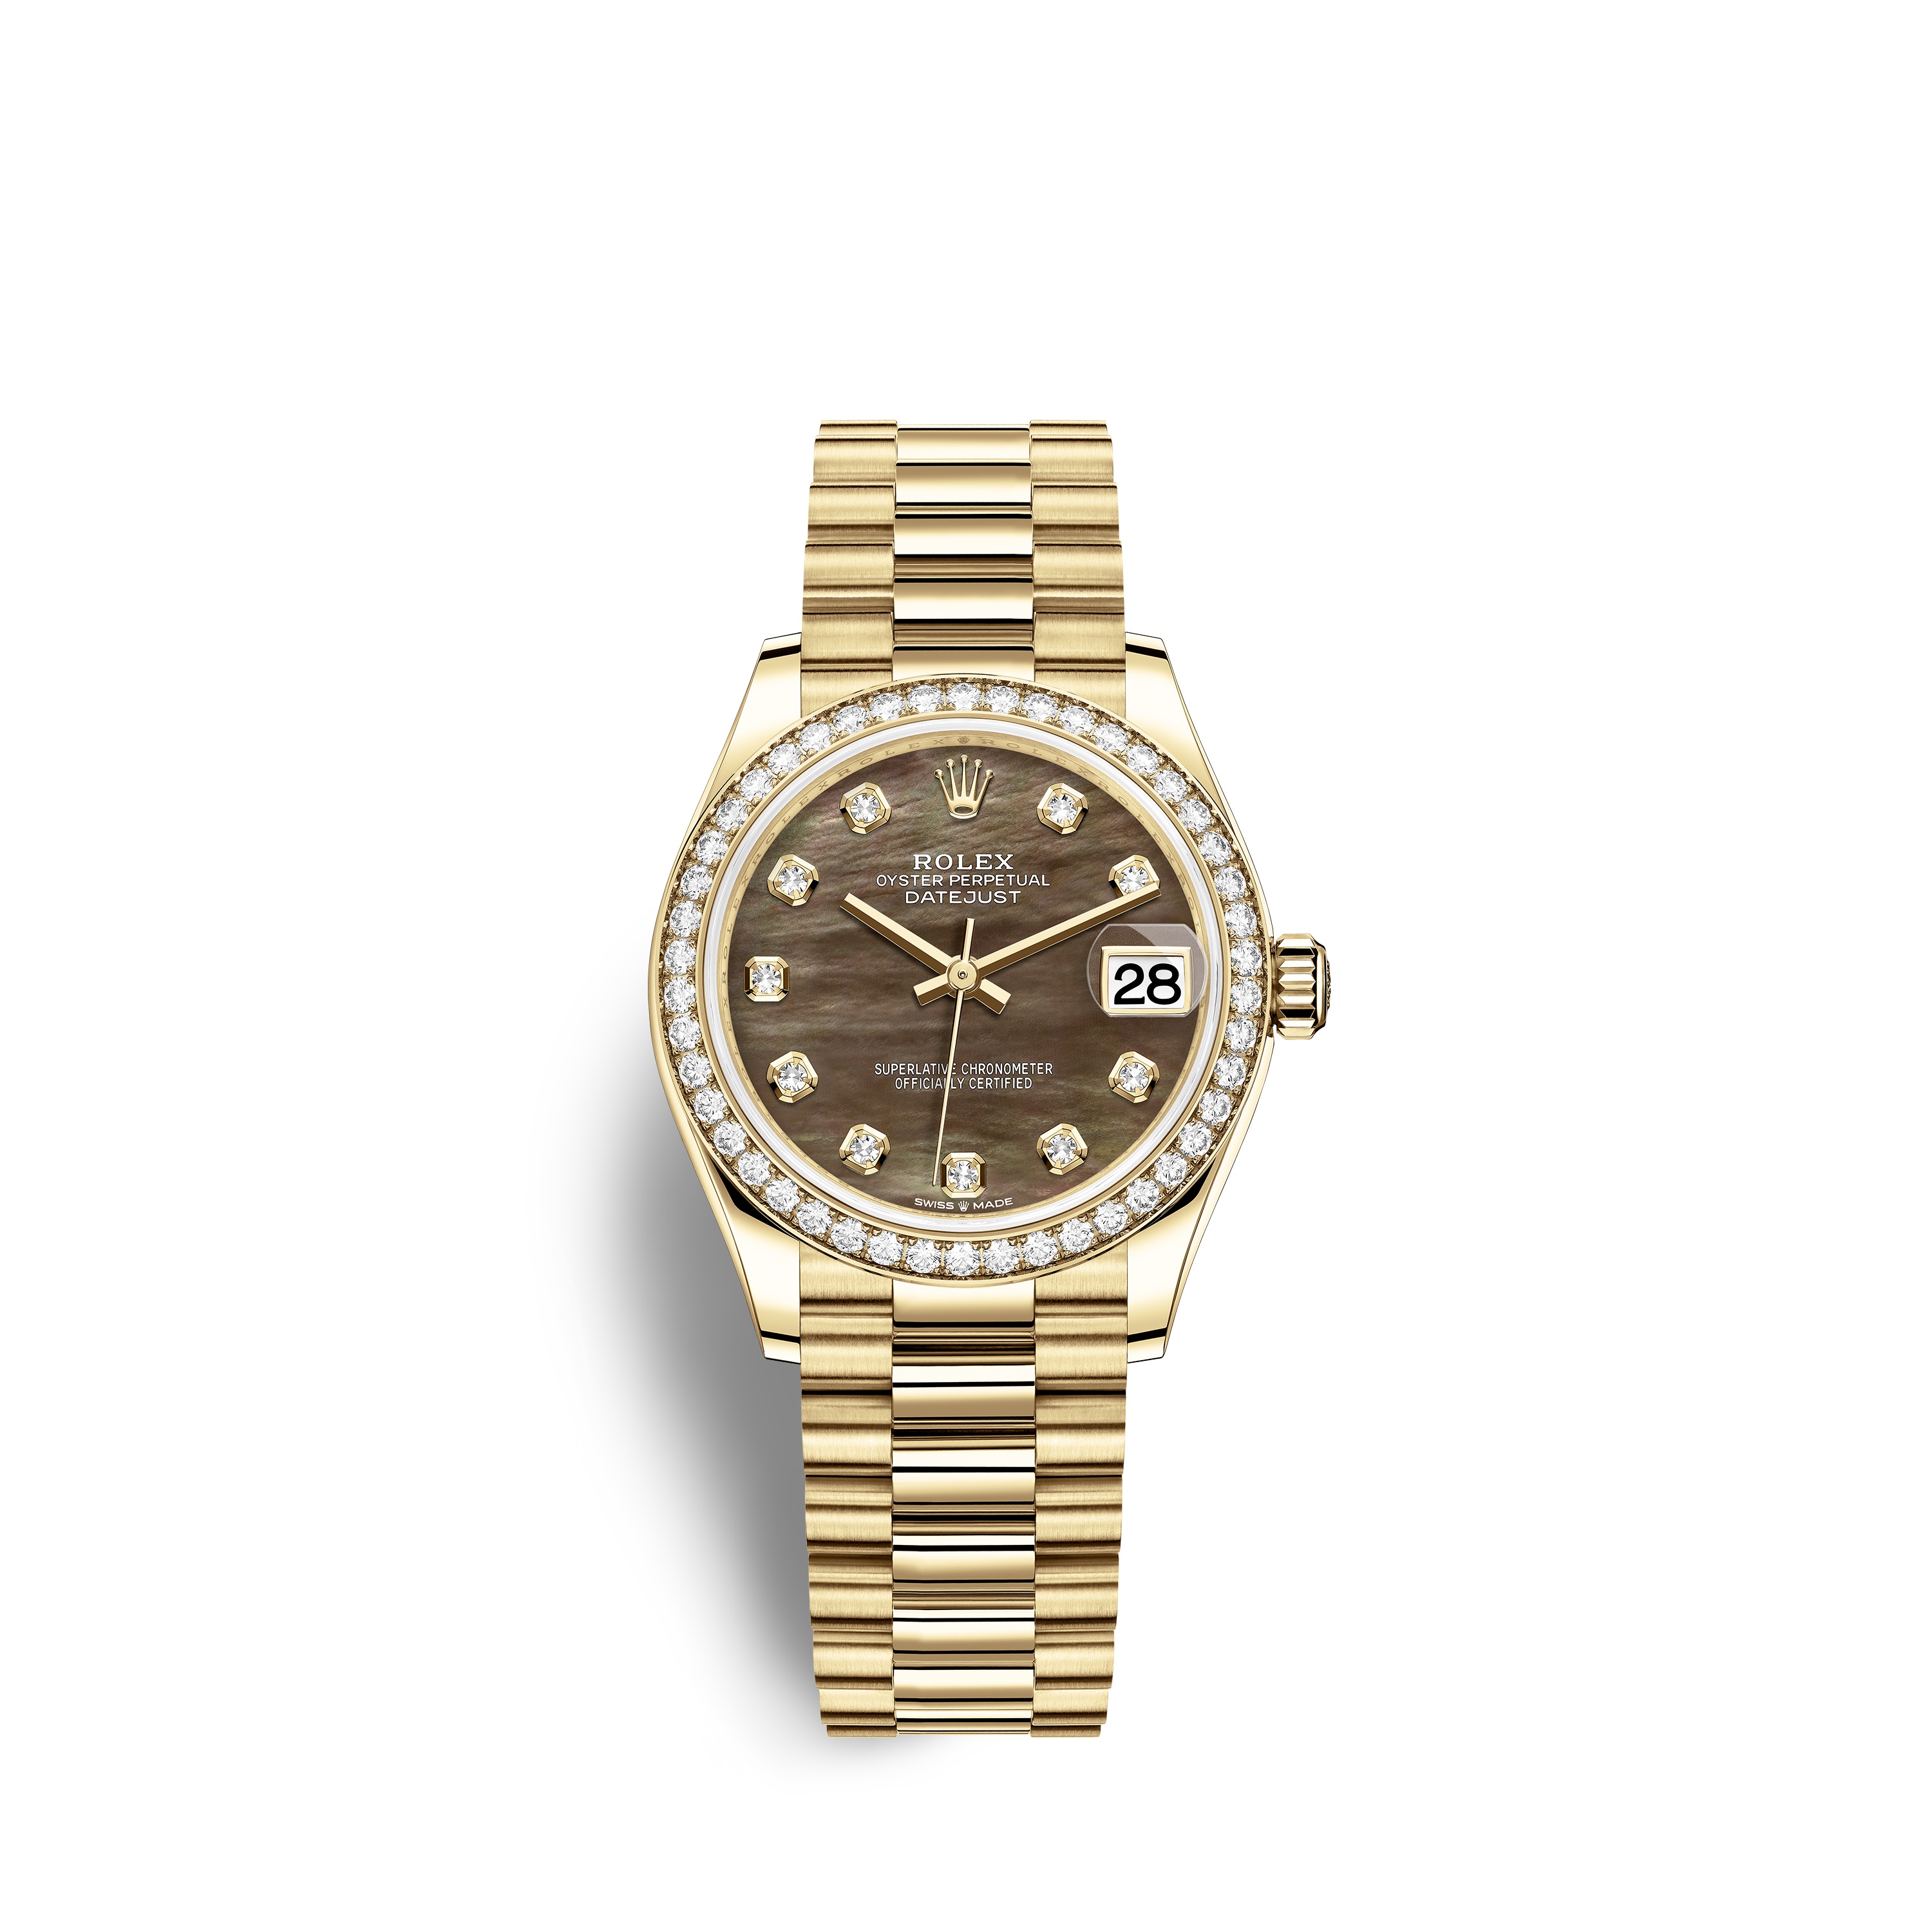 Datejust 31 278288RBR Gold & Diamonds Watch (Black Mother-of-Pearl Set with Diamonds)